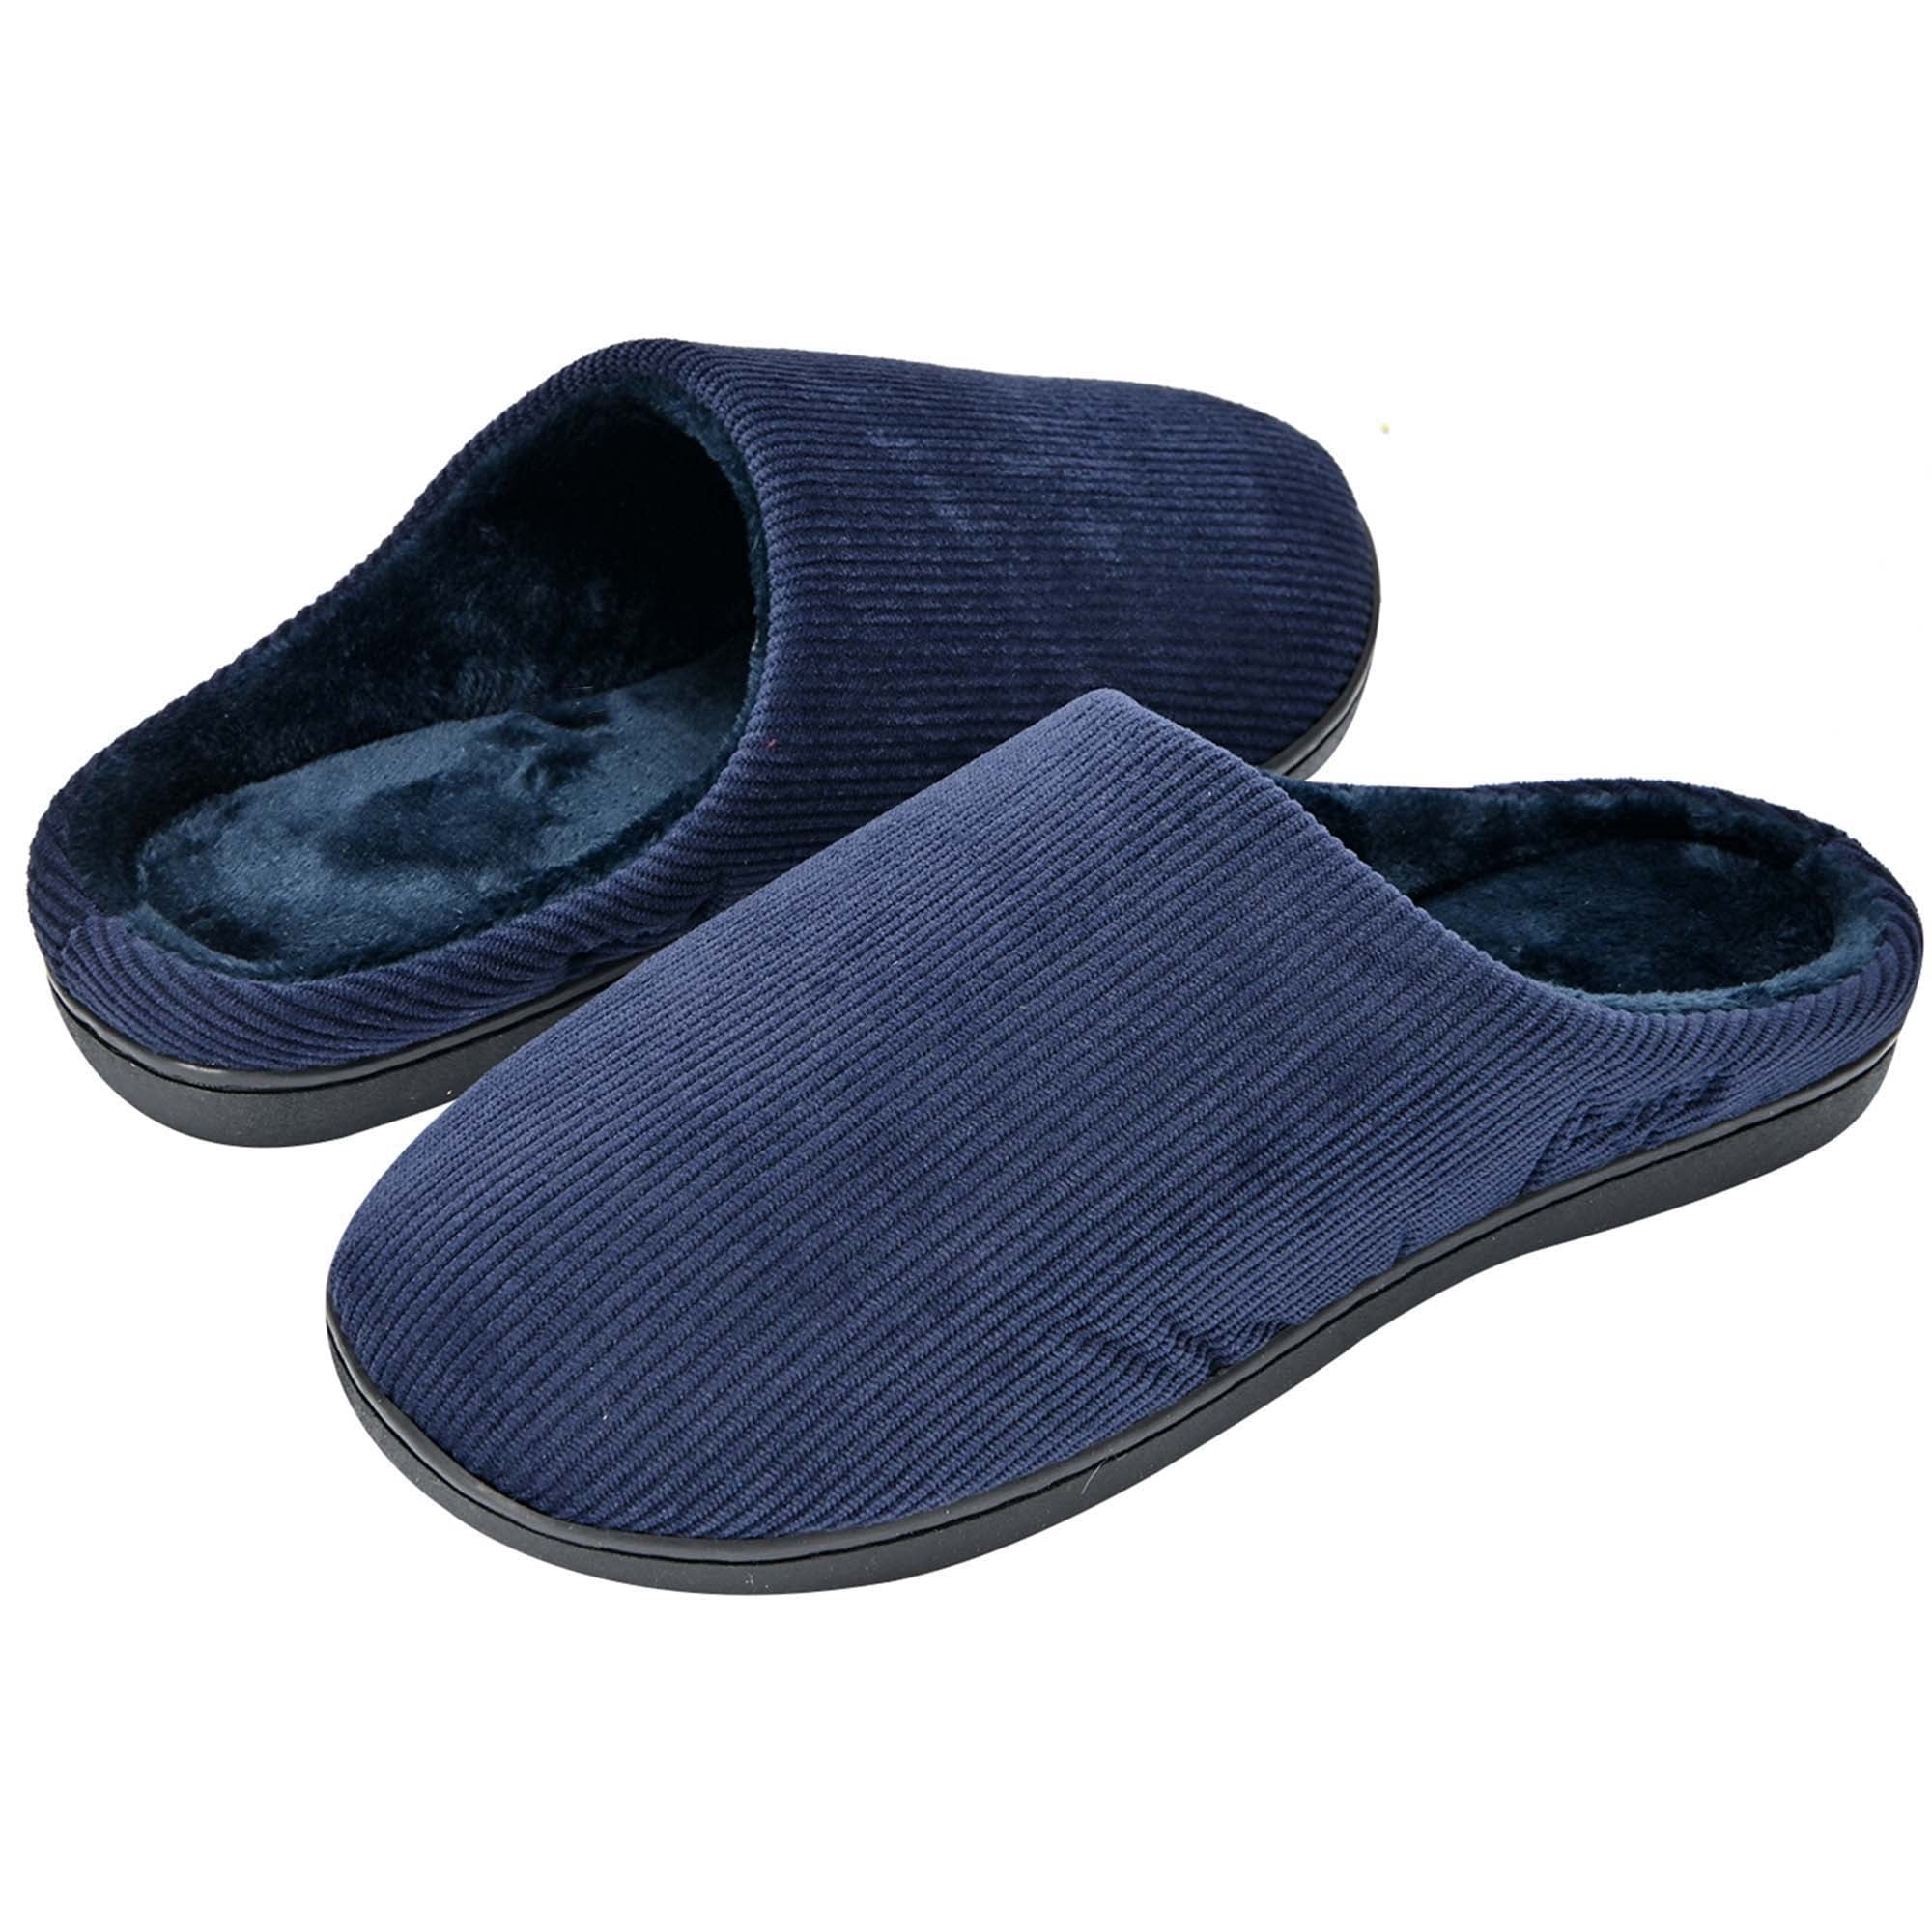 Bergman Kelly Memory Foam Slippers for Women & Men, Super Cushiony Slip-On  House Shoes for WFH Comfort (Cush Collection), US Company - Walmart.com